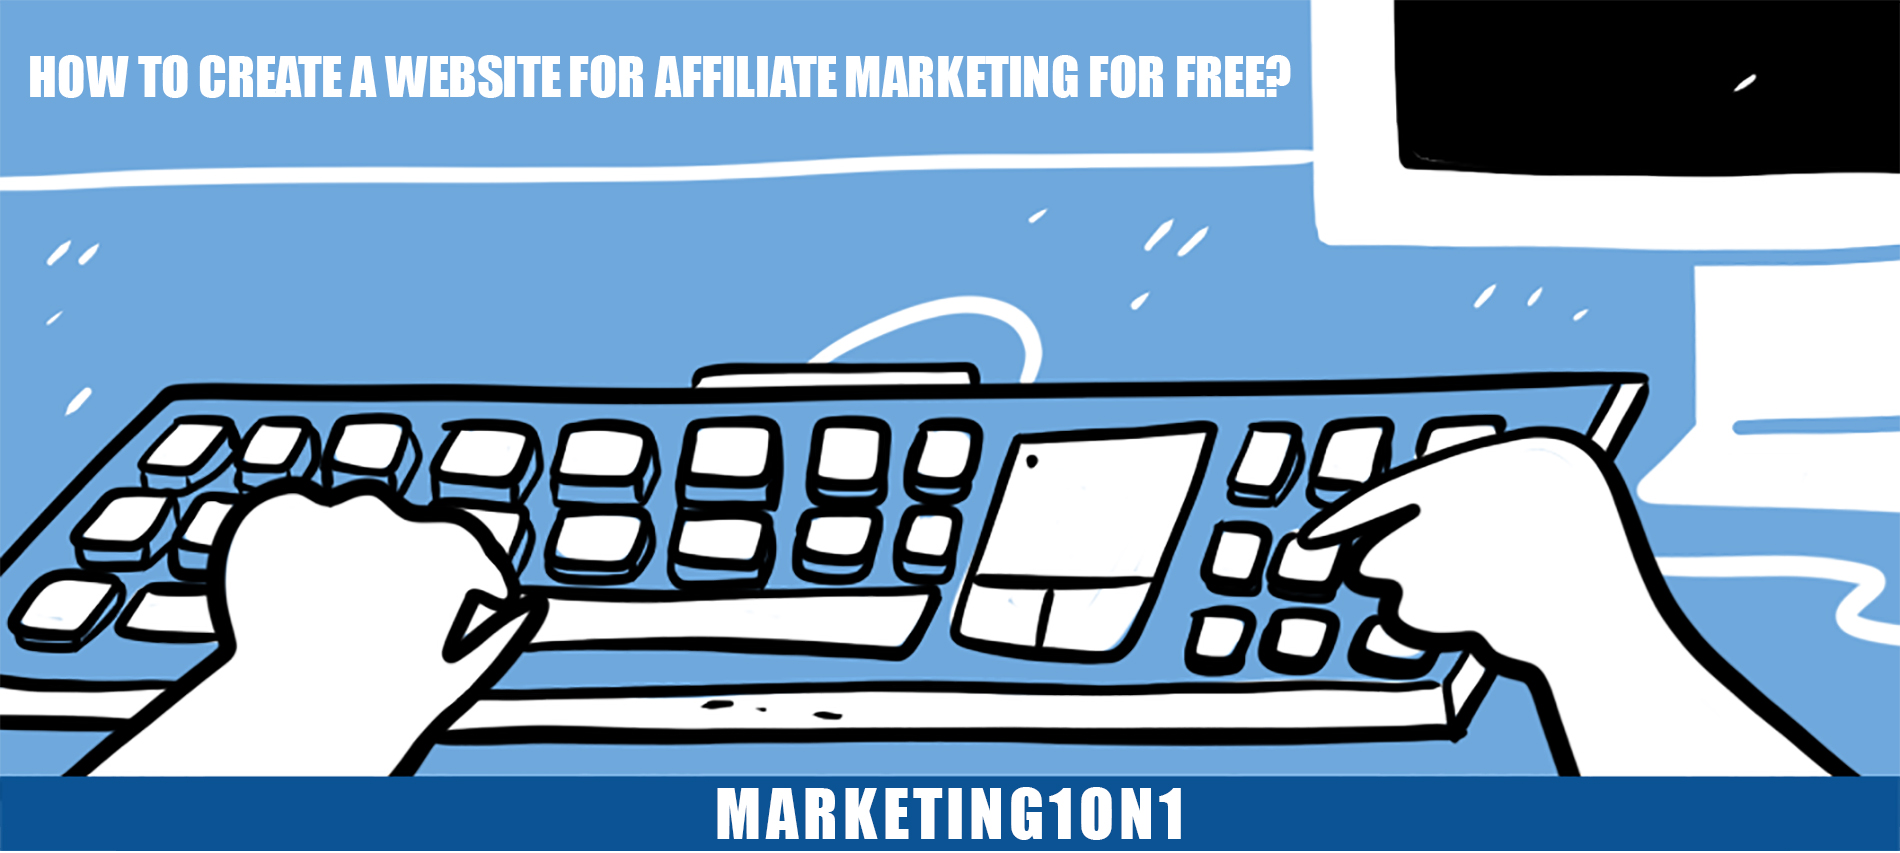 How to create a website for affiliate marketing for free?